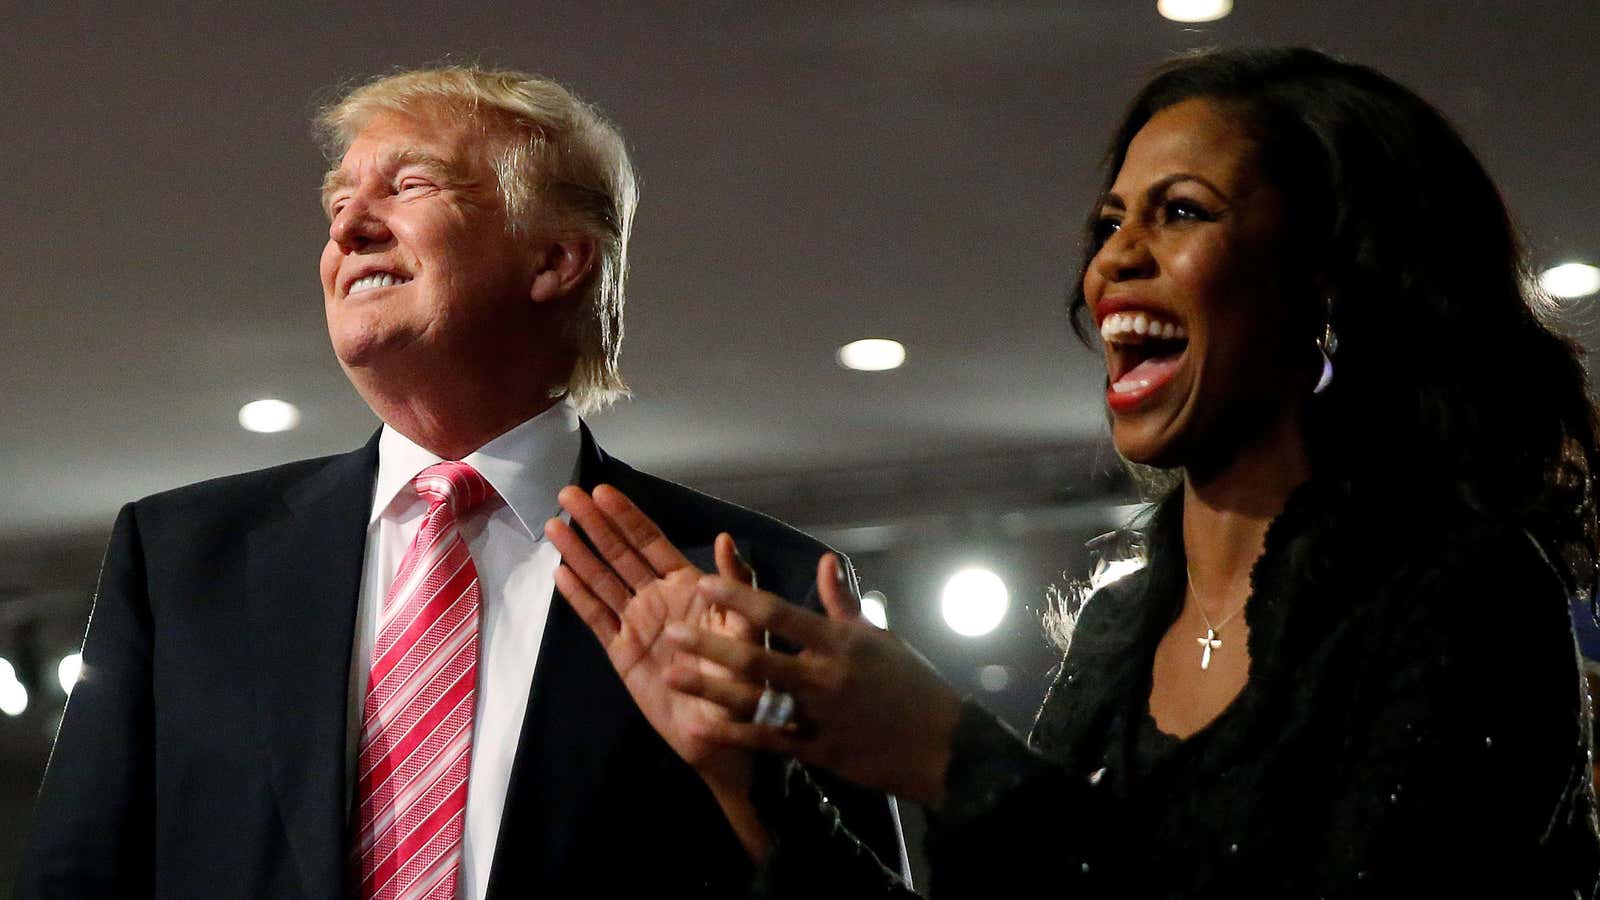 Trump and Omarosa in happier times.